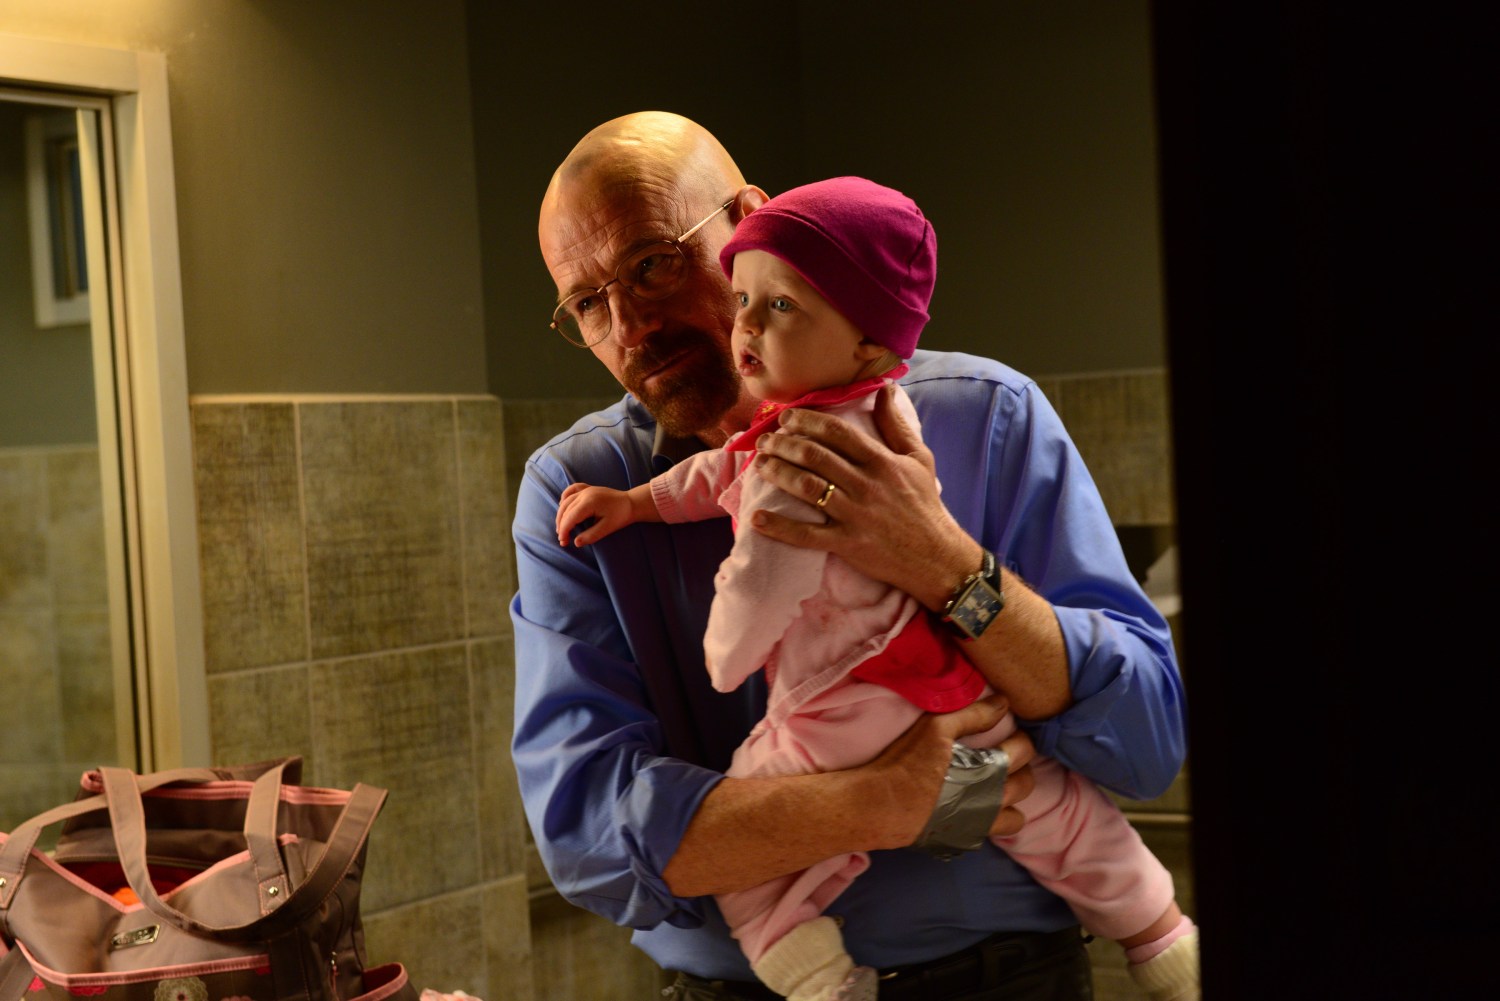 Breaking Bad' producer: 'I didn't script the baby saying mama